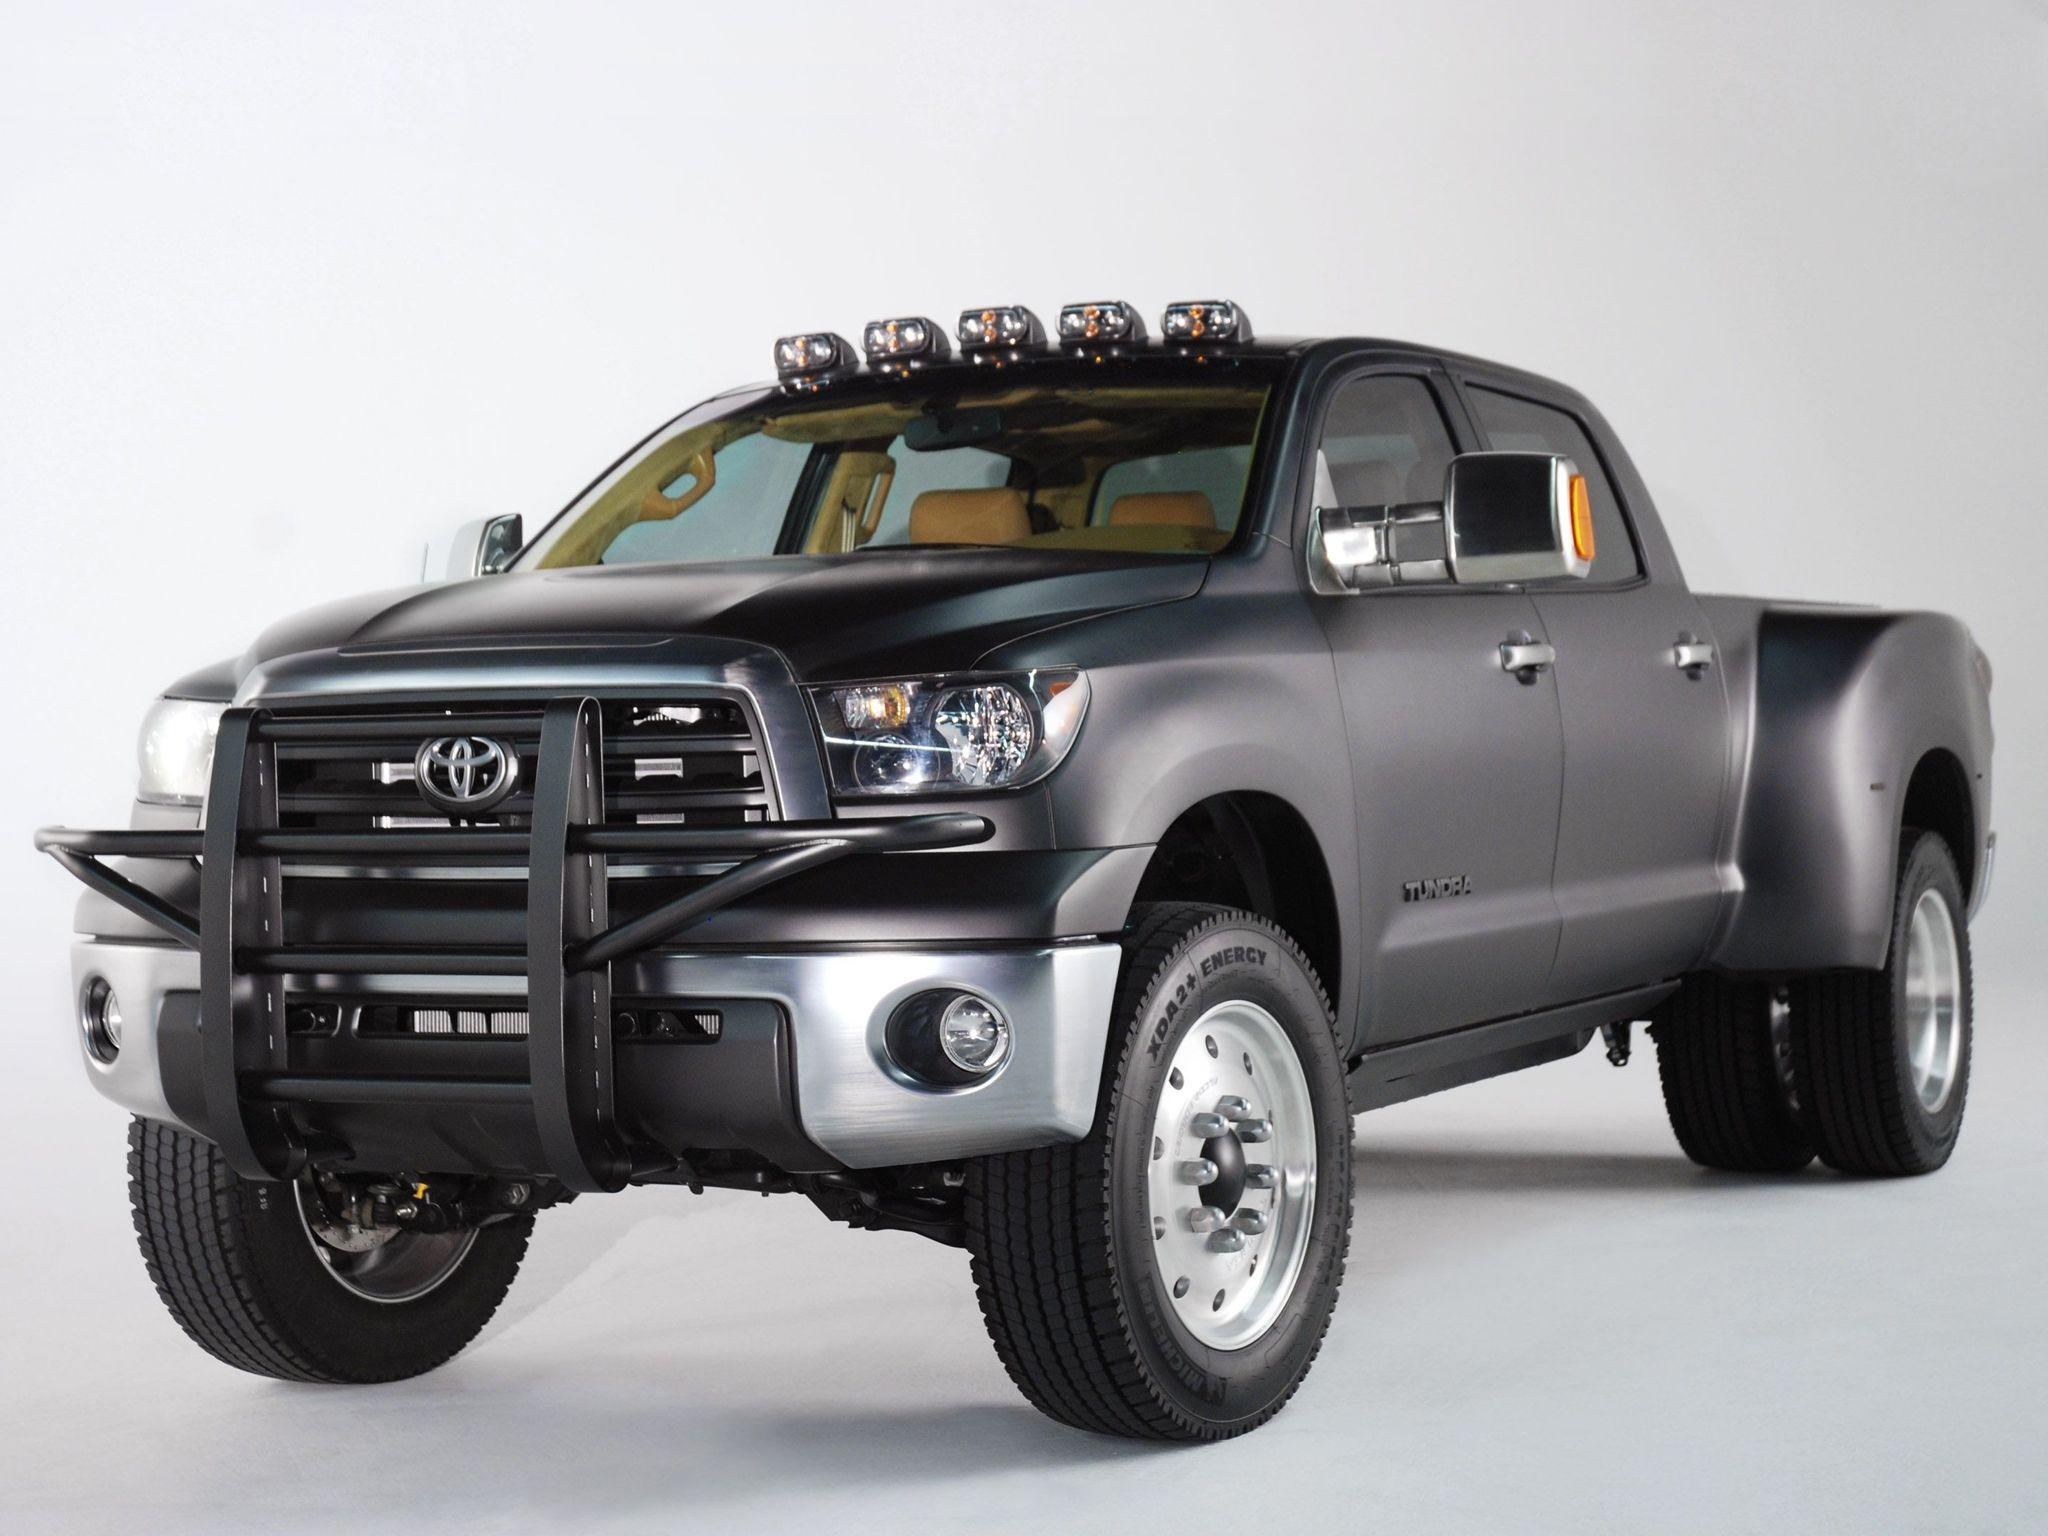 Toyota Tundra Wallpaper HD Photo, Wallpaper and other Image